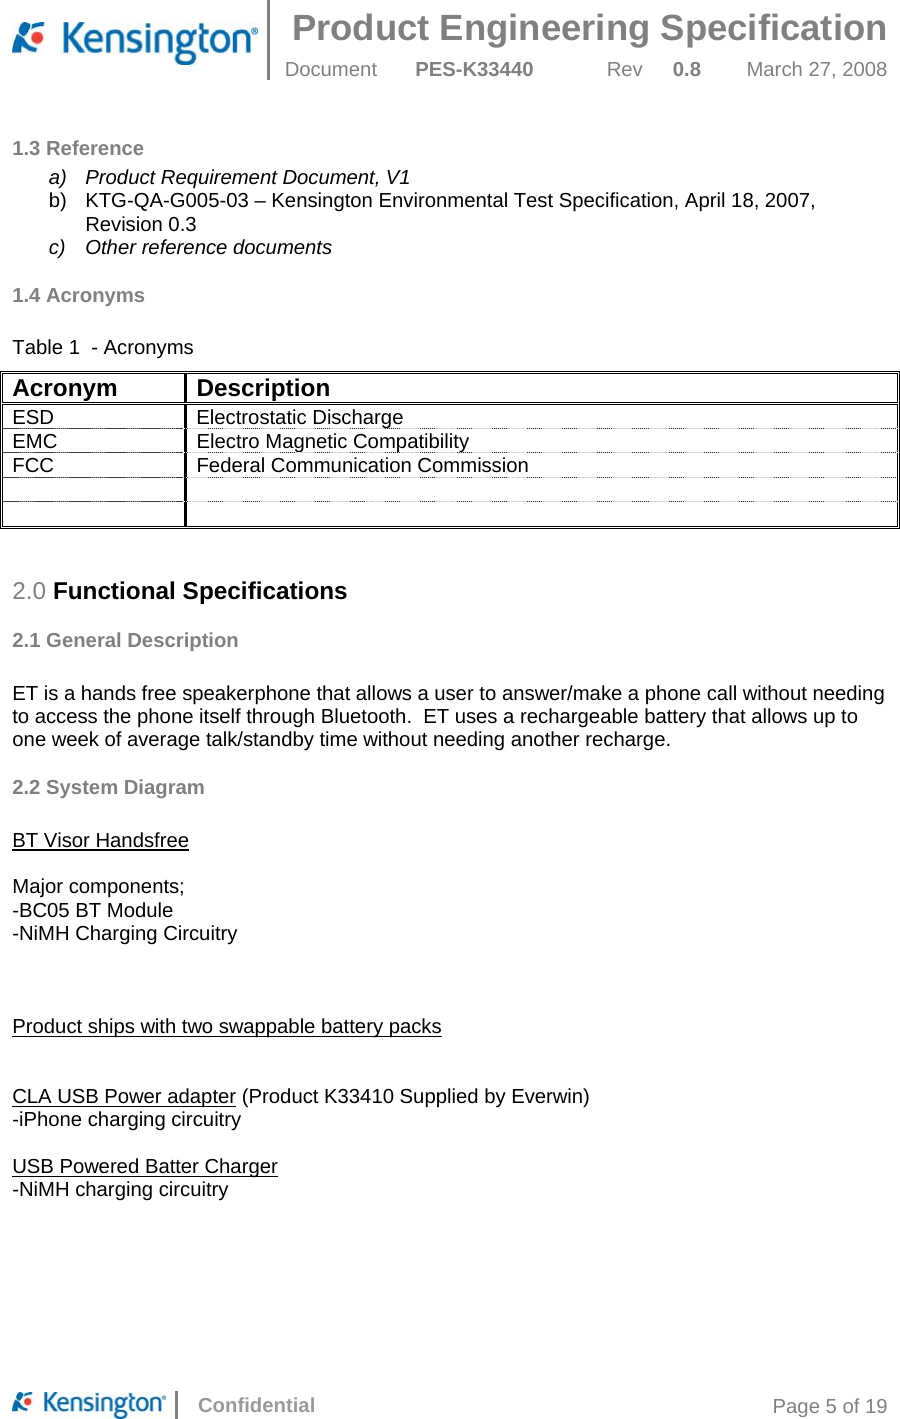 Product Engineering Specification  Document  PES-K33440 Rev 0.8 March 27, 2008      Confidential  Page 5 of 19 1.3 Reference a)  Product Requirement Document, V1 b)  KTG-QA-G005-03 – Kensington Environmental Test Specification, April 18, 2007,  Revision 0.3 c)  Other reference documents 1.4 Acronyms  Table 1  - Acronyms Acronym Description ESD Electrostatic Discharge EMC  Electro Magnetic Compatibility FCC Federal Communication Commission       2.0 Functional Specifications 2.1 General Description  ET is a hands free speakerphone that allows a user to answer/make a phone call without needing to access the phone itself through Bluetooth.  ET uses a rechargeable battery that allows up to one week of average talk/standby time without needing another recharge. 2.2 System Diagram  BT Visor Handsfree  Major components; -BC05 BT Module -NiMH Charging Circuitry    Product ships with two swappable battery packs   CLA USB Power adapter (Product K33410 Supplied by Everwin) -iPhone charging circuitry  USB Powered Batter Charger -NiMH charging circuitry  